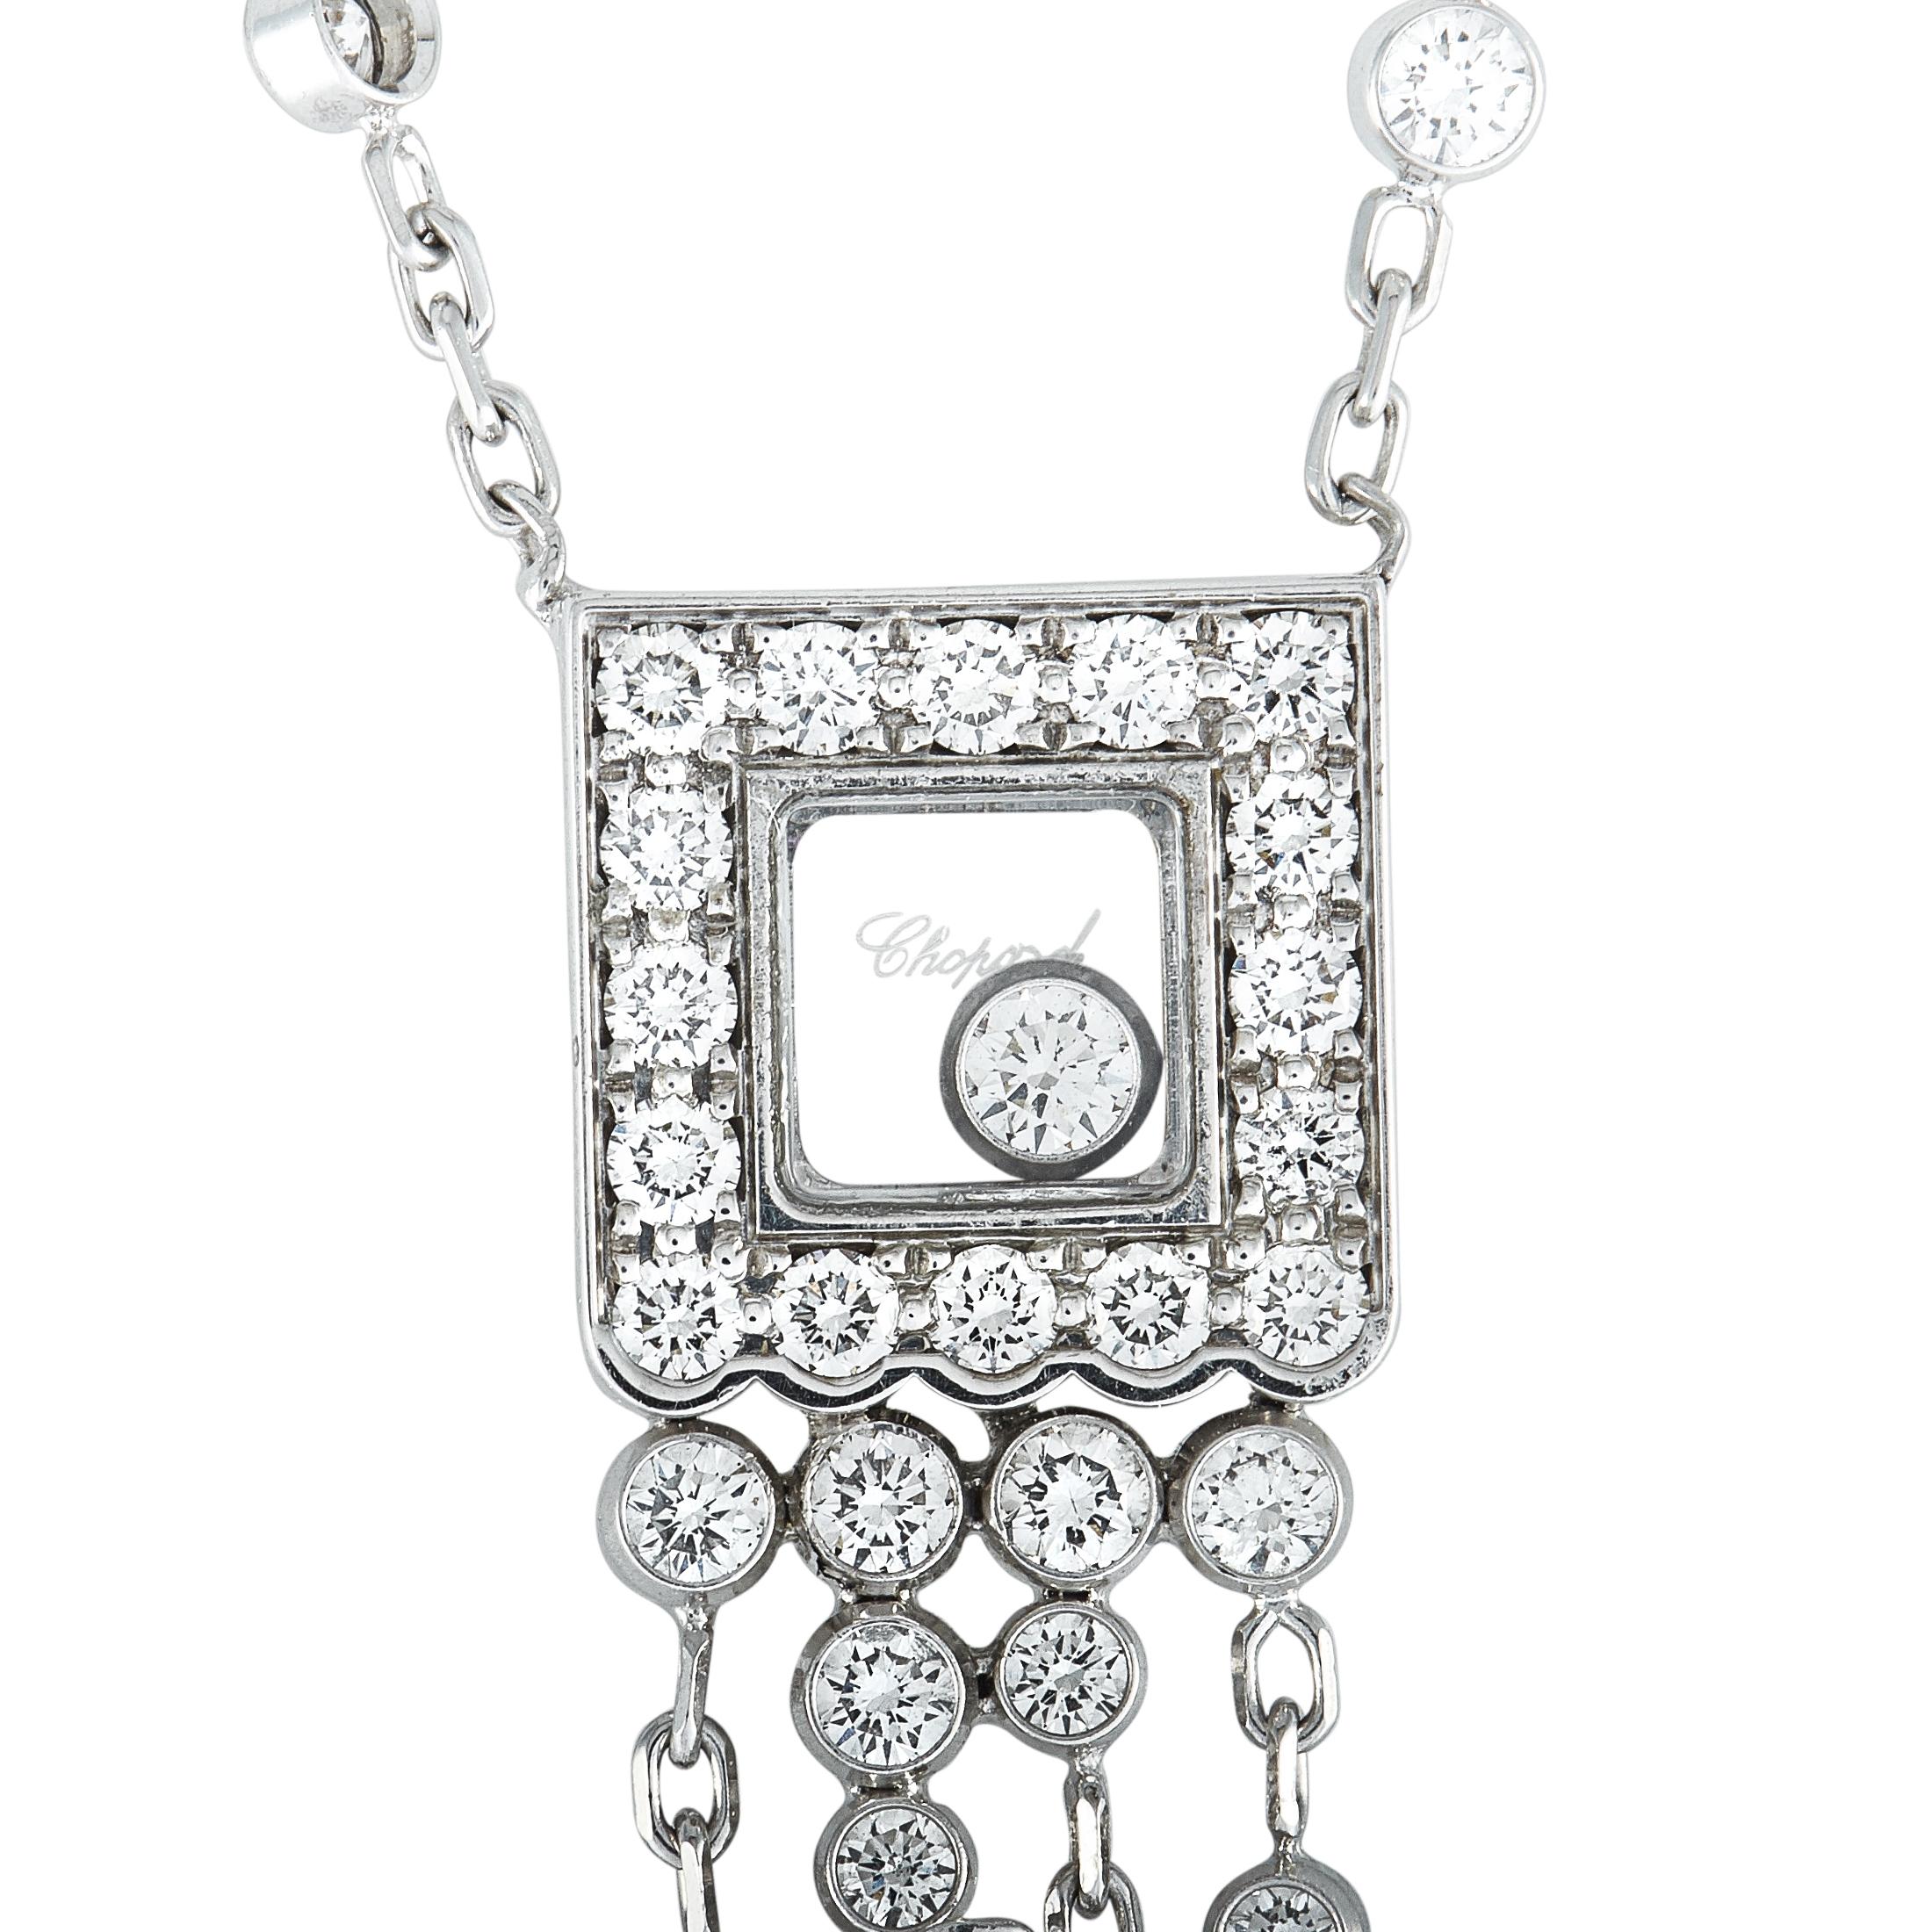 The Chopard “Happy Diamonds” necklace is crafted from 18K white gold, boasting a 14” chain with lobster claw closure and a pendant that measures 3.25” in length and 0.37” in width. The necklace weighs 10.5 grams and is set with a total of 1.63